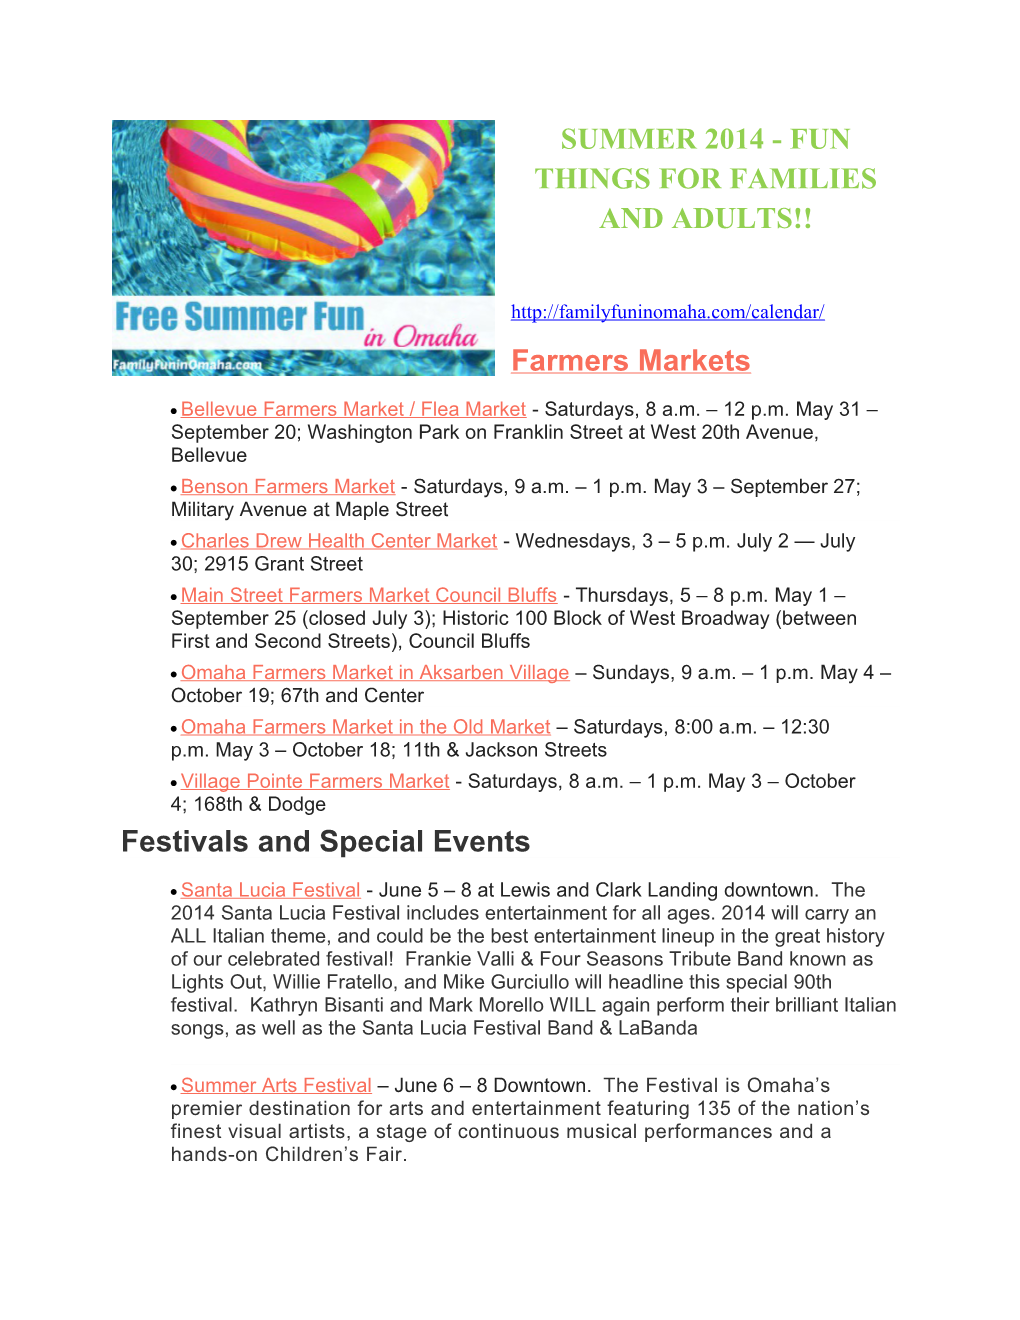 Summer 2014 - Fun Things for Families and Adults